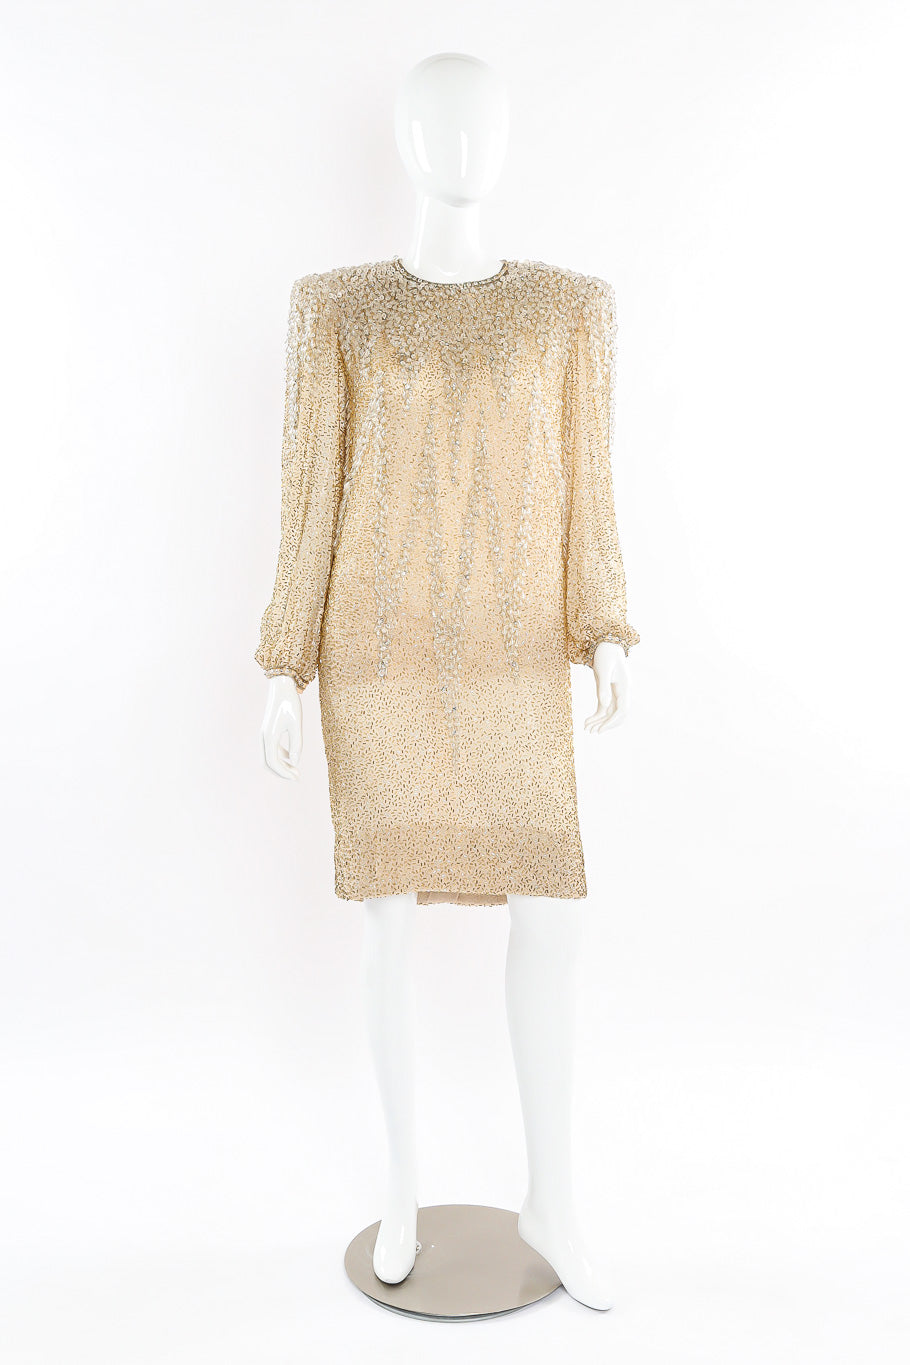 Beaded champagne silk shift dress by Victoria Royal. @recessla